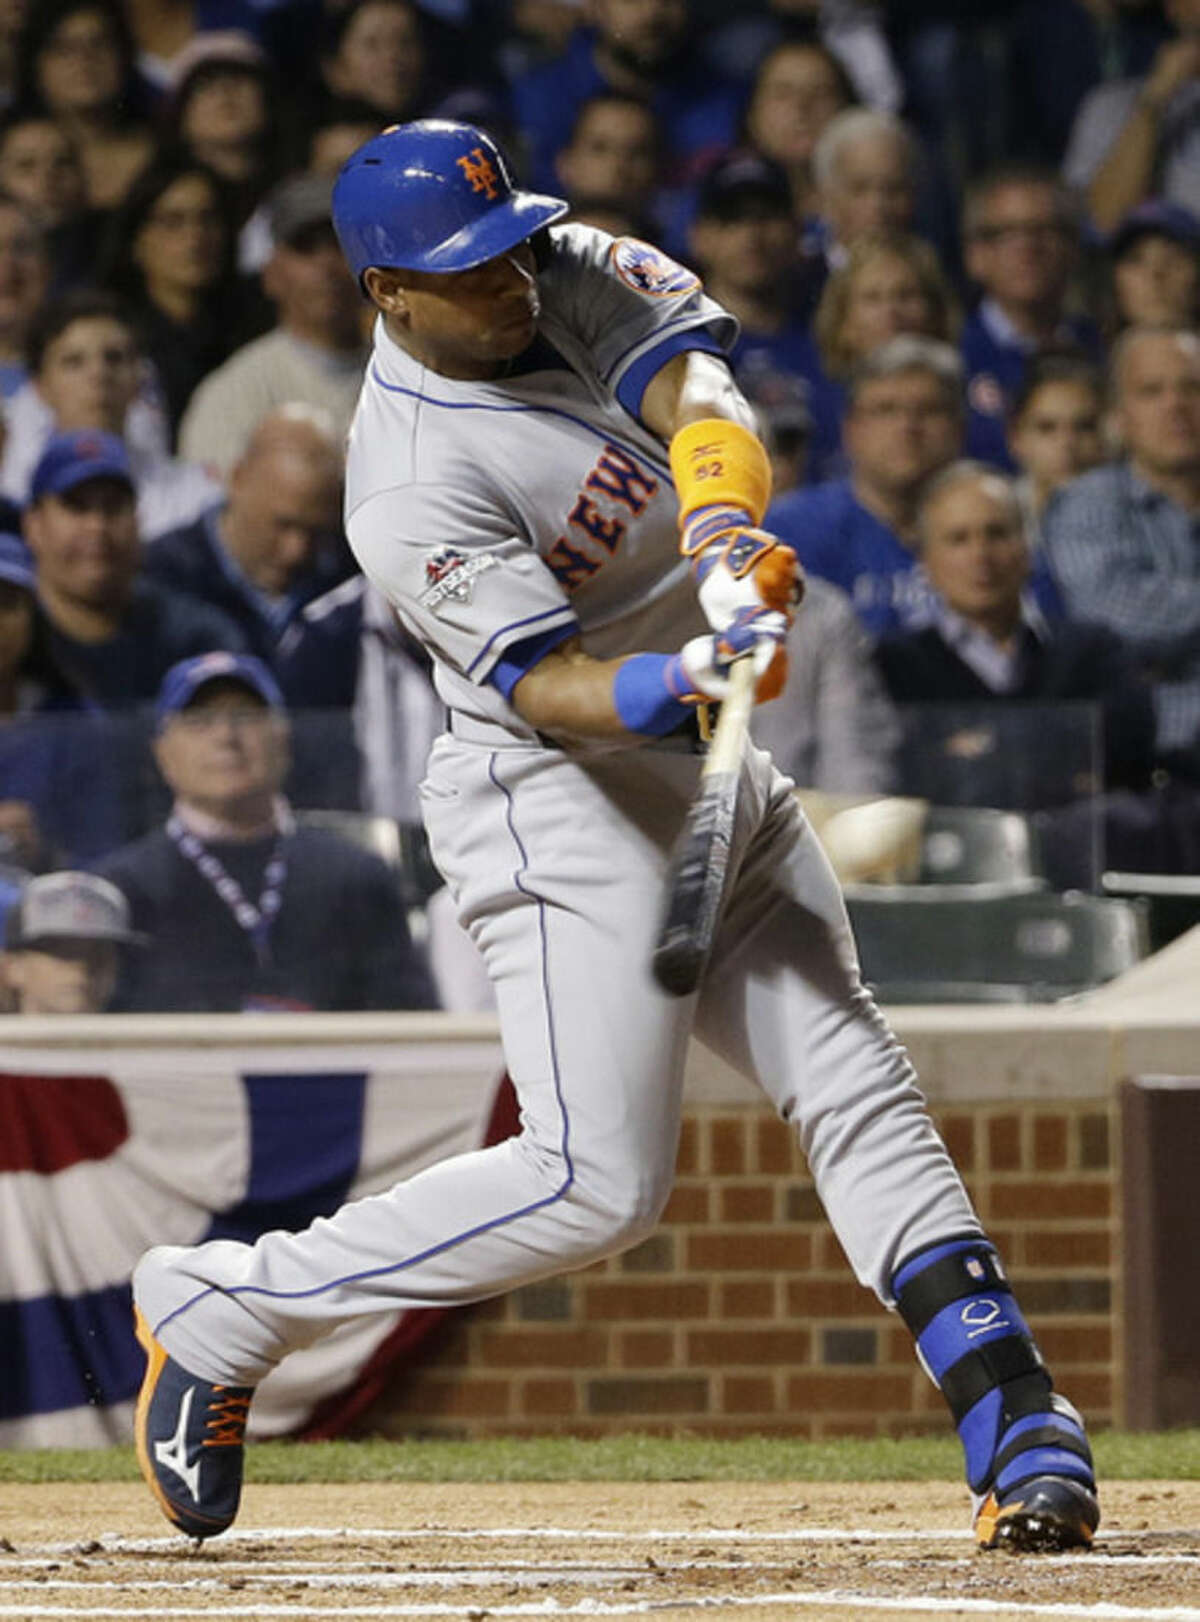 New York Mets' Yoenis Cespedes hits an RBI double during the first inning of Game 3 of the National League baseball championship series against the Chicago Cubs Tuesday, Oct. 20, 2015, in Chicago. (AP Photo/David J. Phillip)